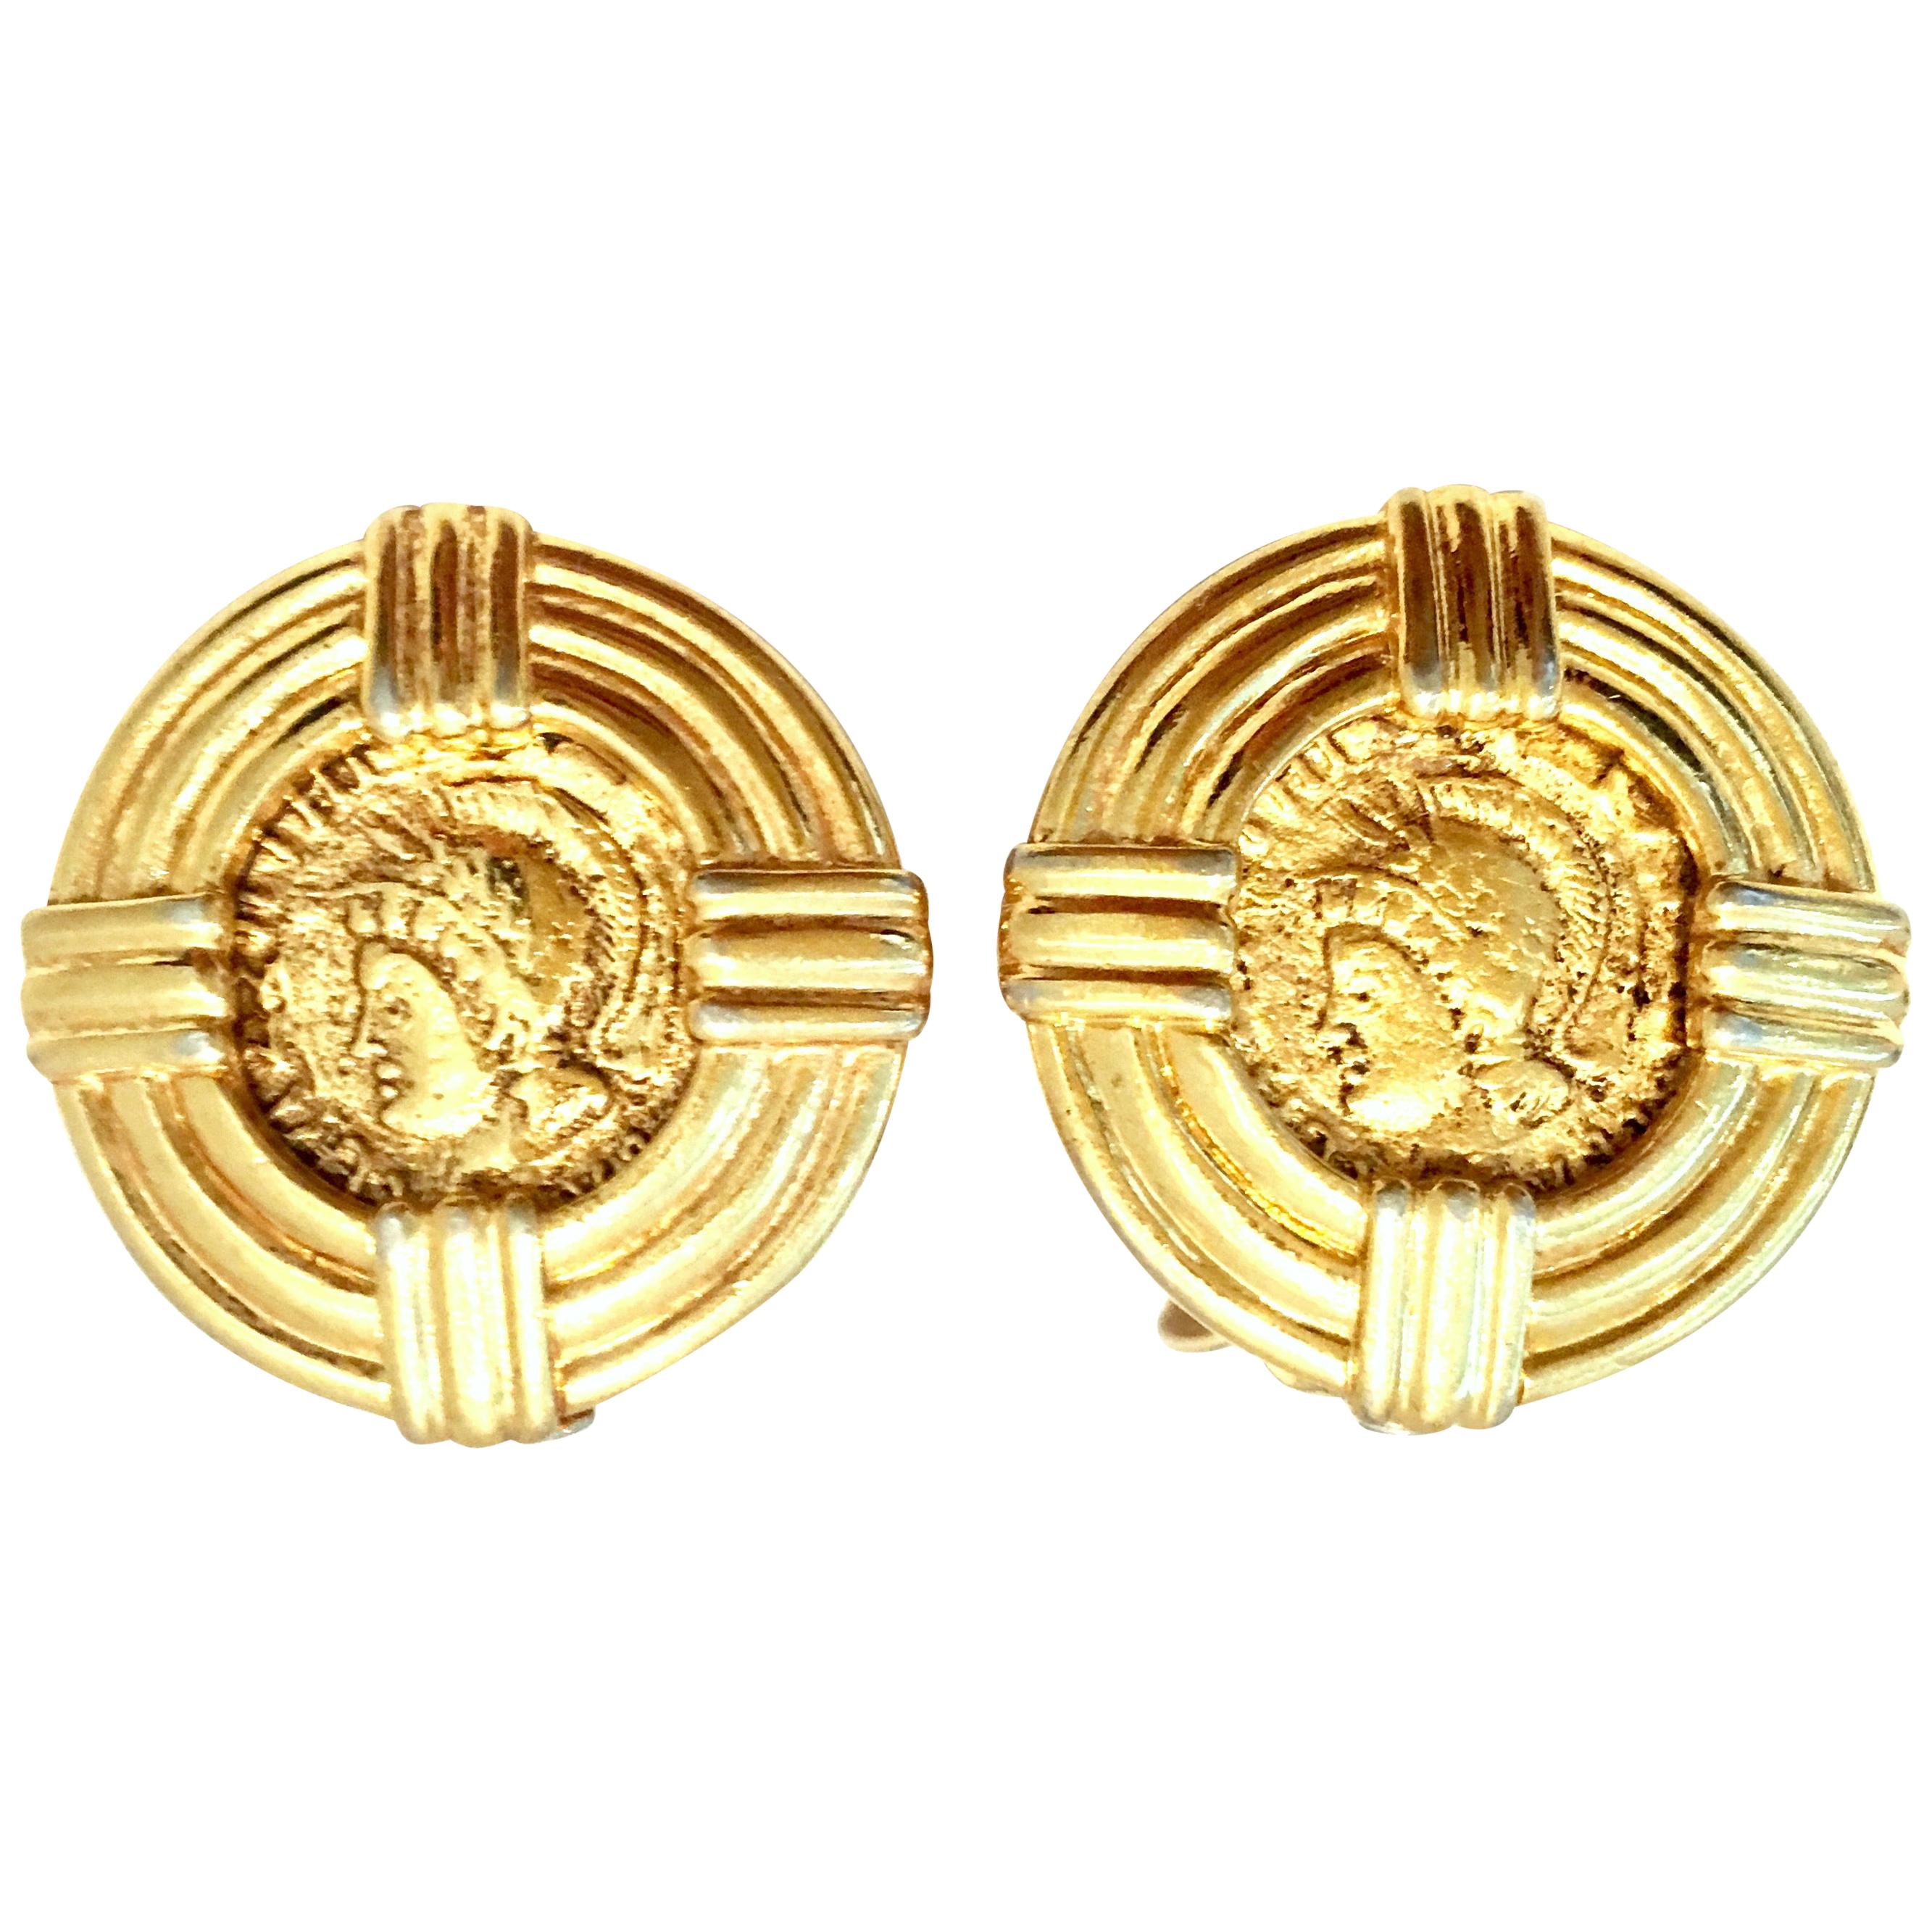 20th Century Pair Of Gold Plate Roman Coin Earrings By, Carolee For Sale